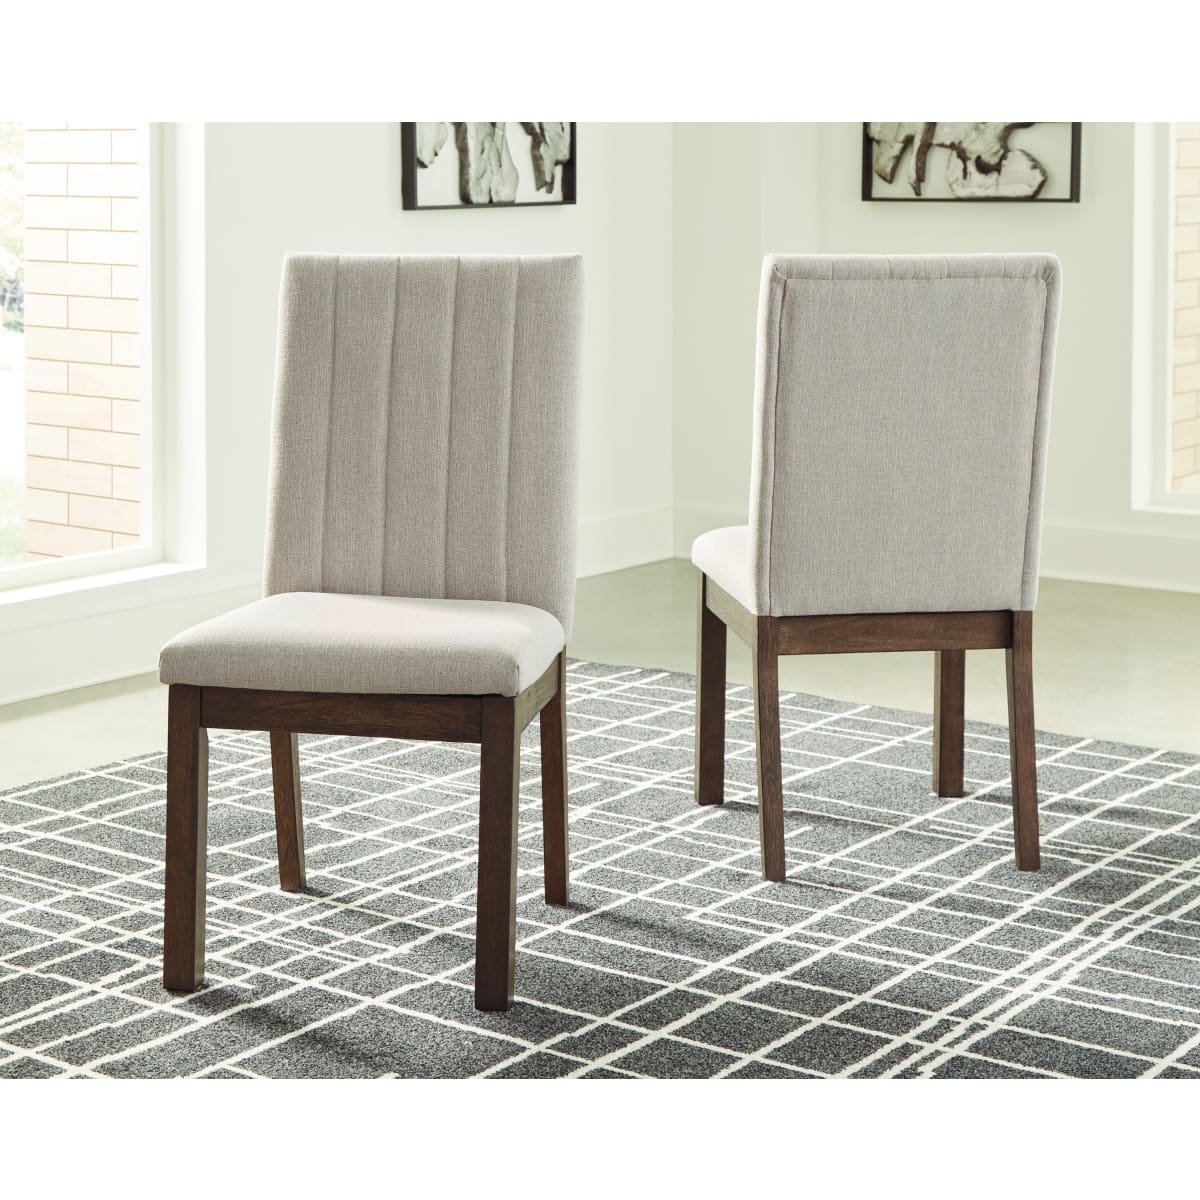 Dellbeck Dining Chair - dining-chairs